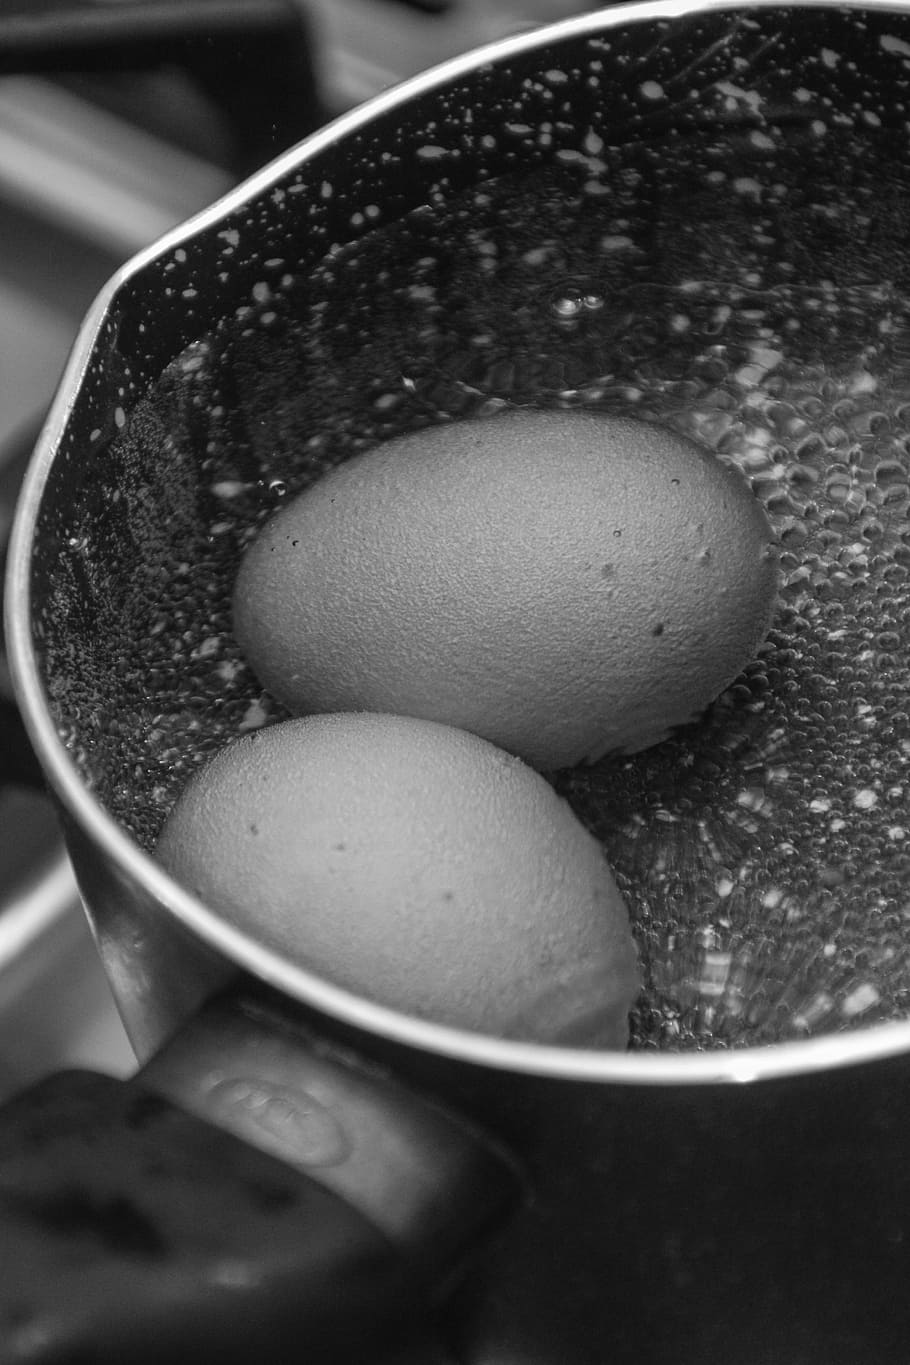 pan, water, kitchen, boiling water, fire, stove, œuf, black and white picture, food and drink, food